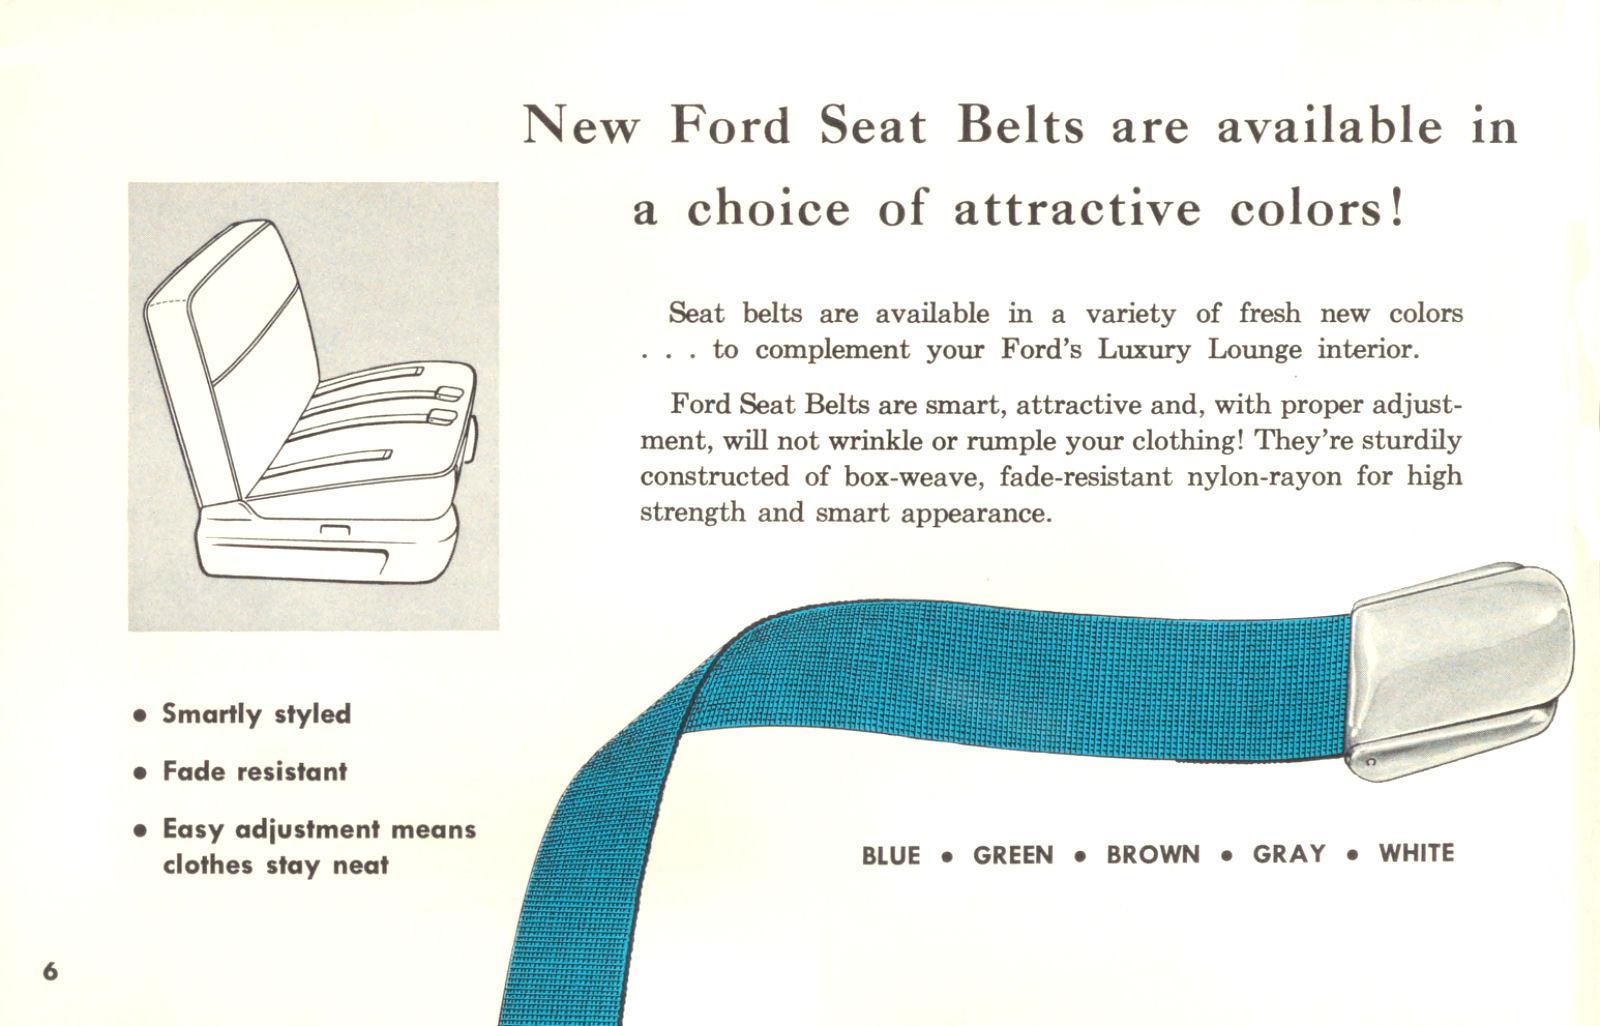 1955 Ford Seat Belts-06